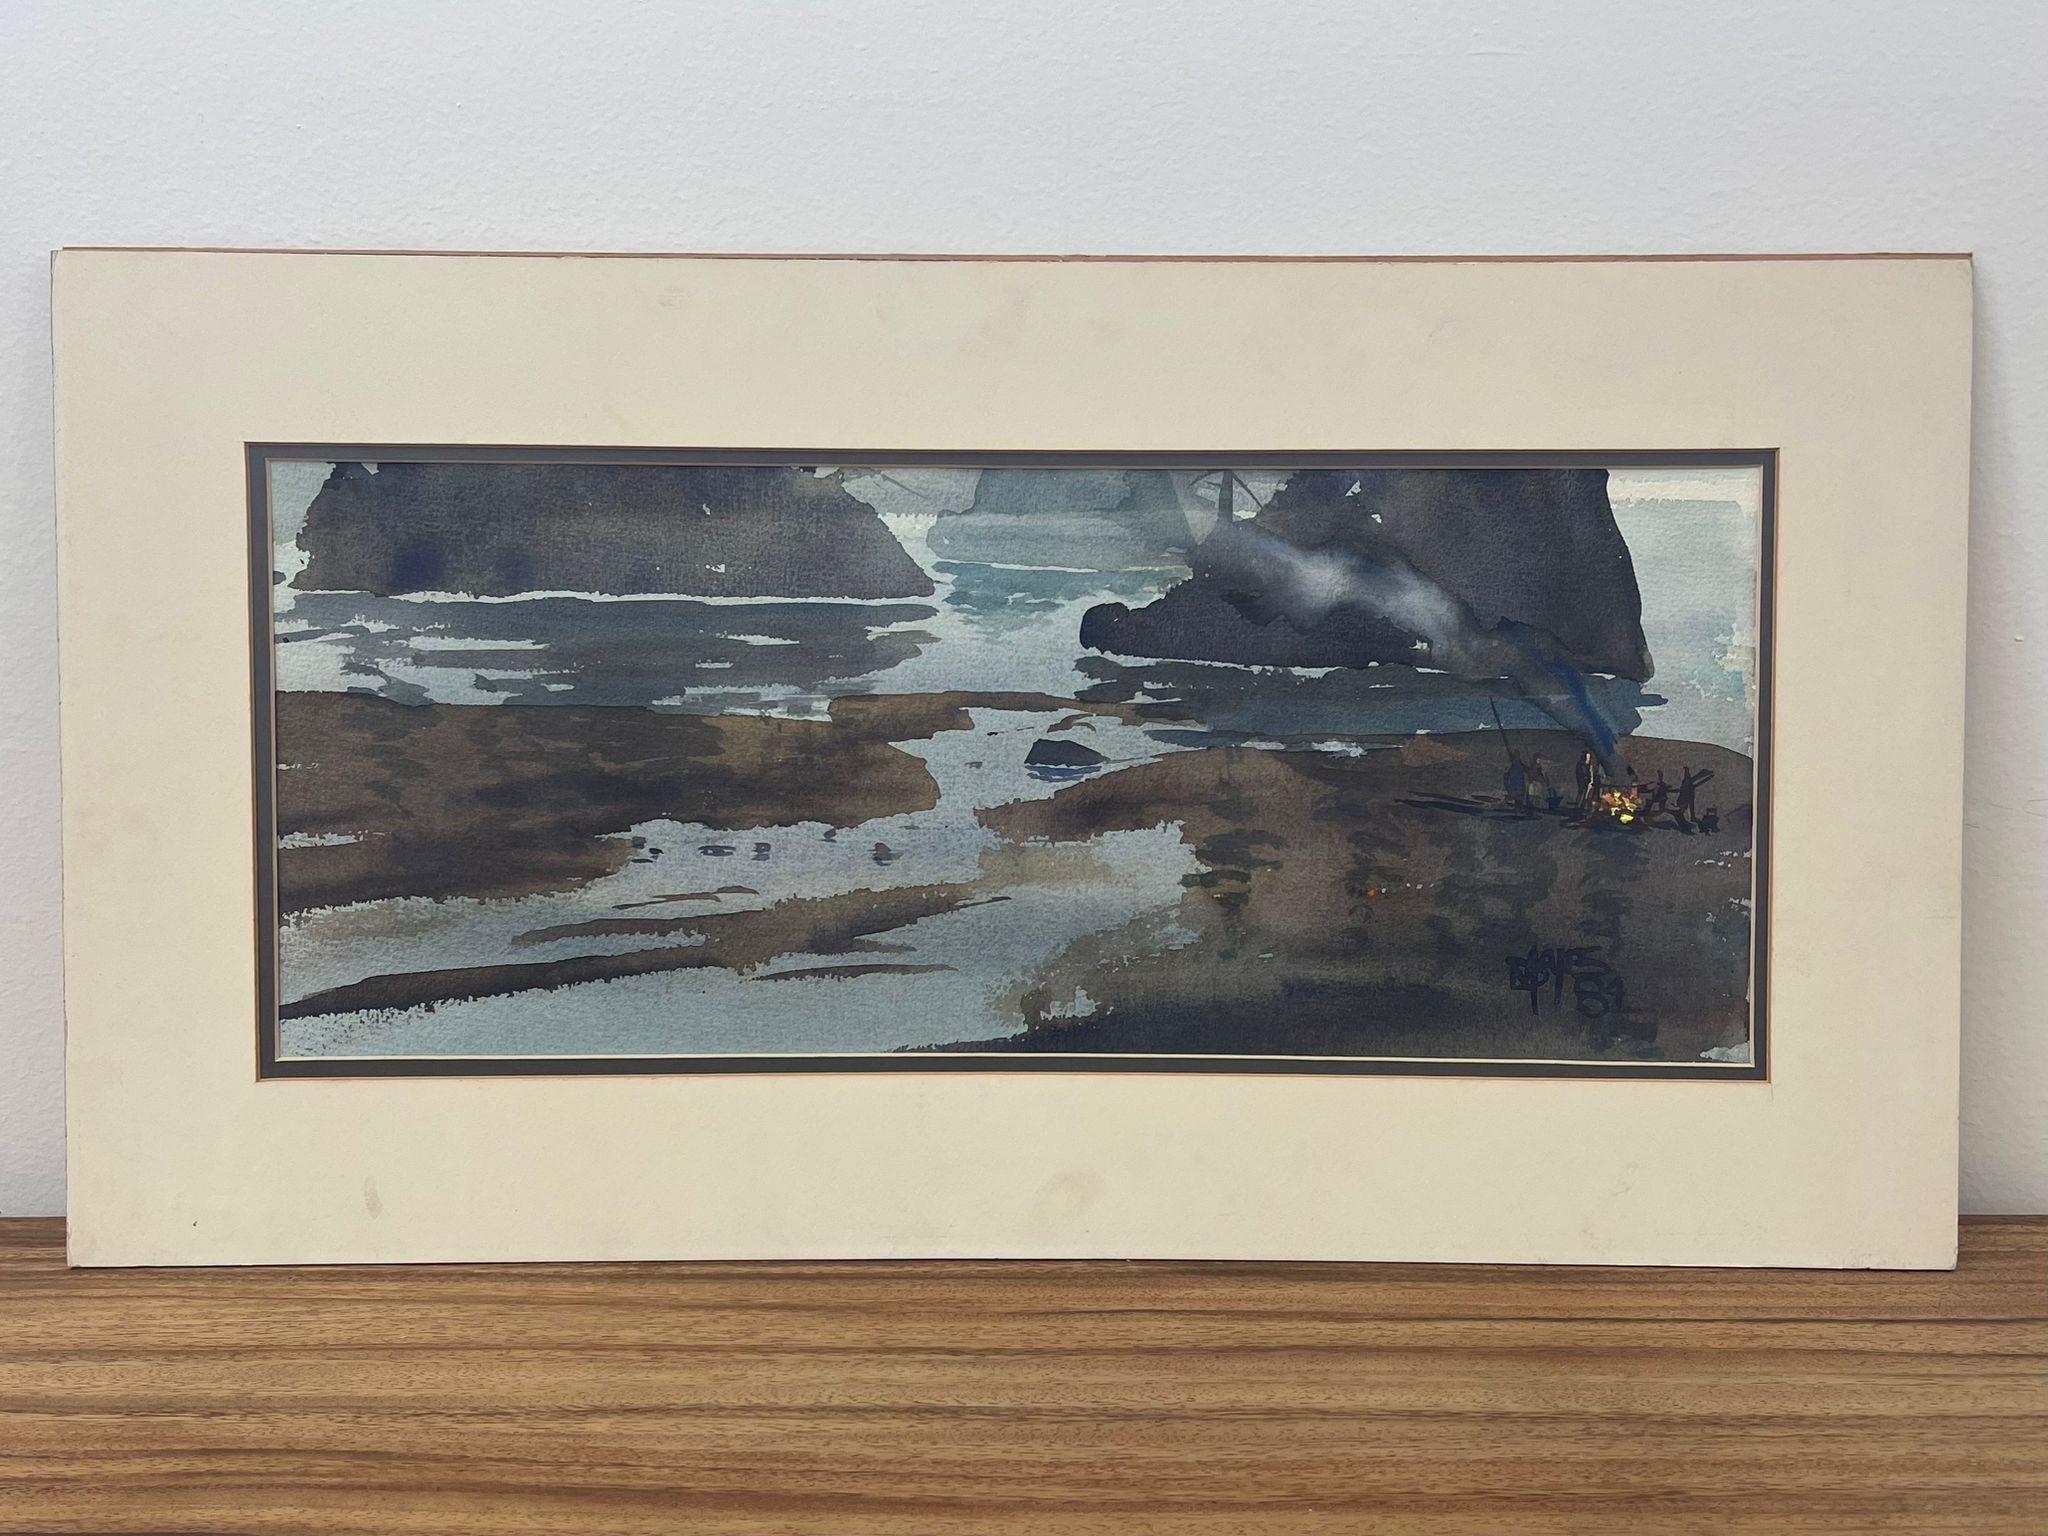 Abstract Possibly. Watercolor on Paper Painting of a Camp fire on the Beach. Board Backing. Vintage Condition Consistent with Age as Pictured.Sold as is

Dimensions. 28 W ; 1/8 D ; 15 H